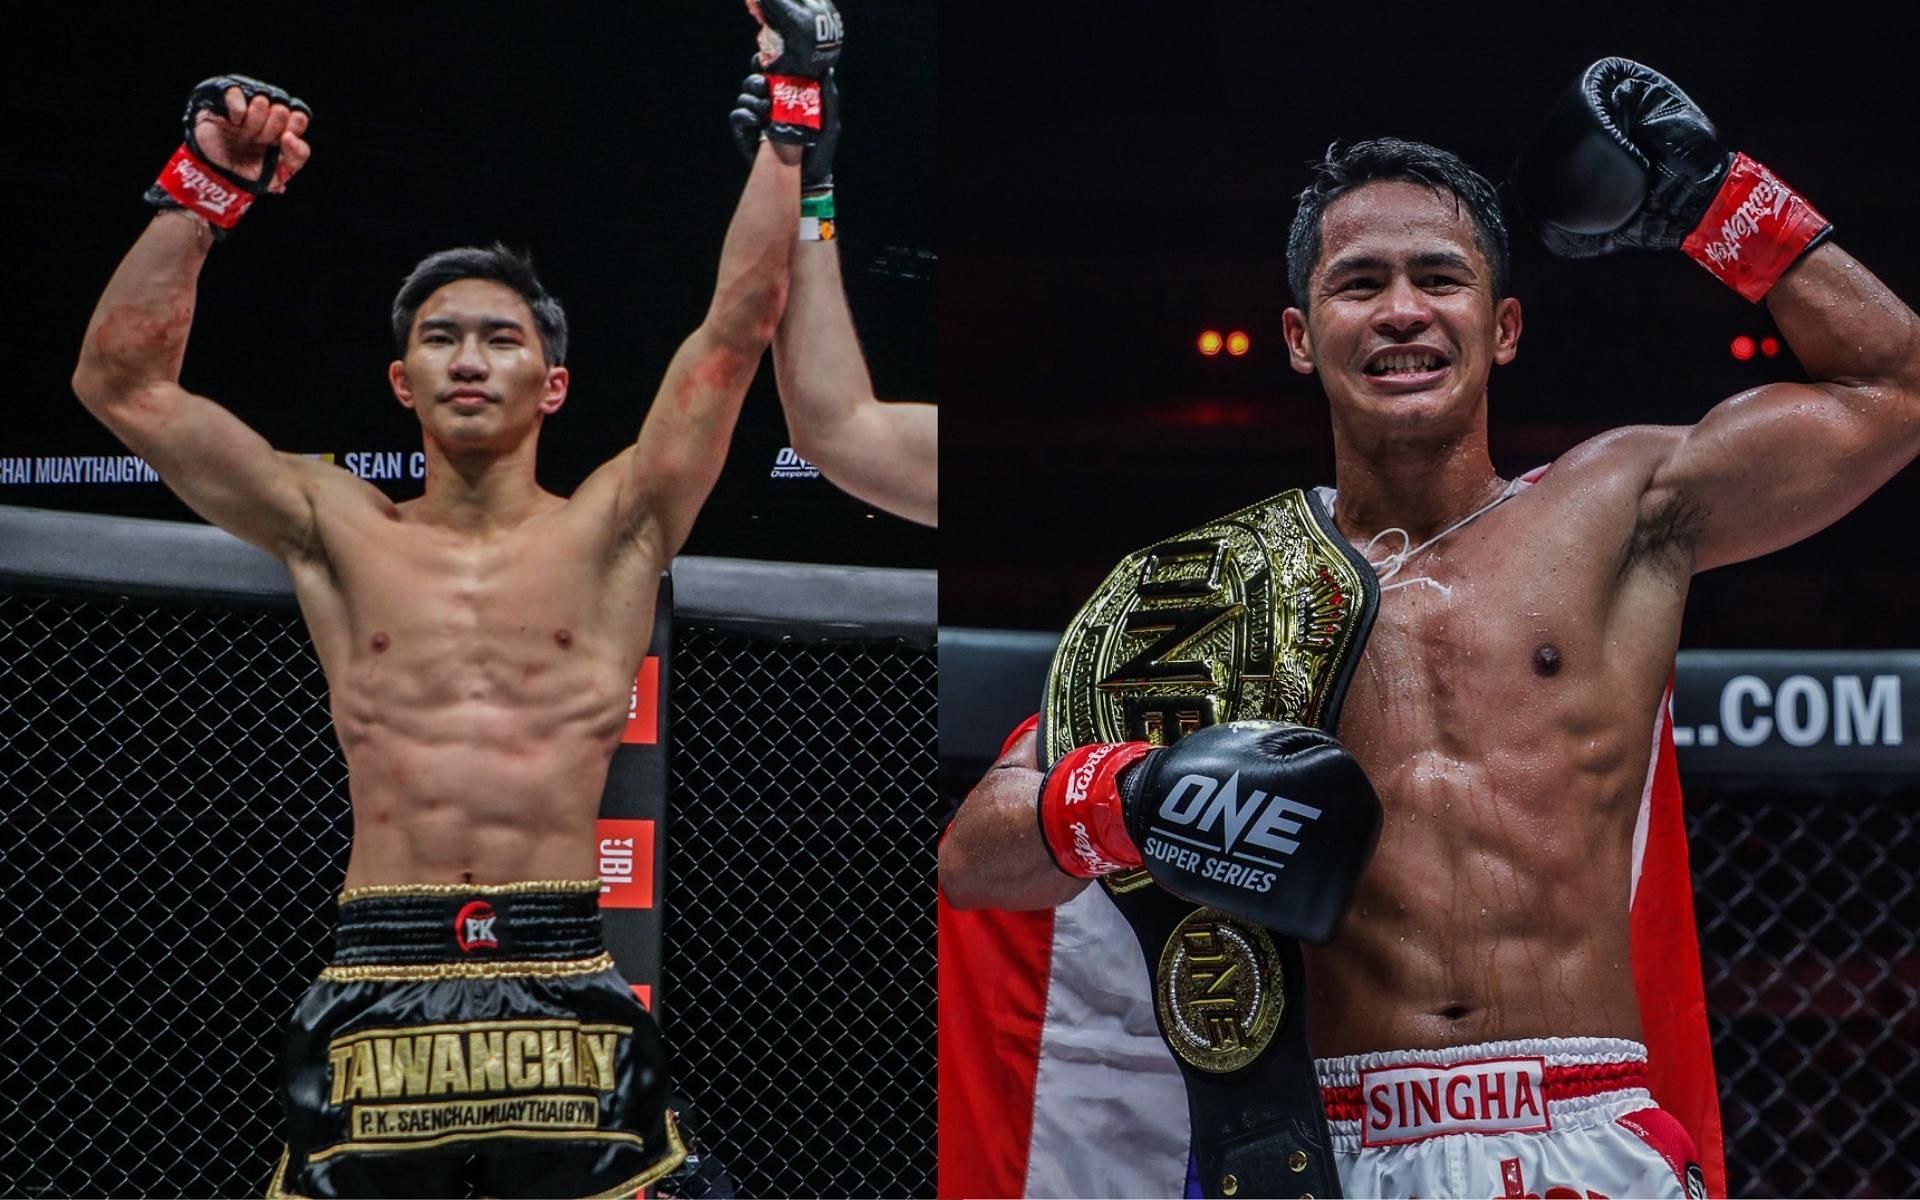 One championship tawanchai feels confident that he can handle one championships featherweight muay thai division